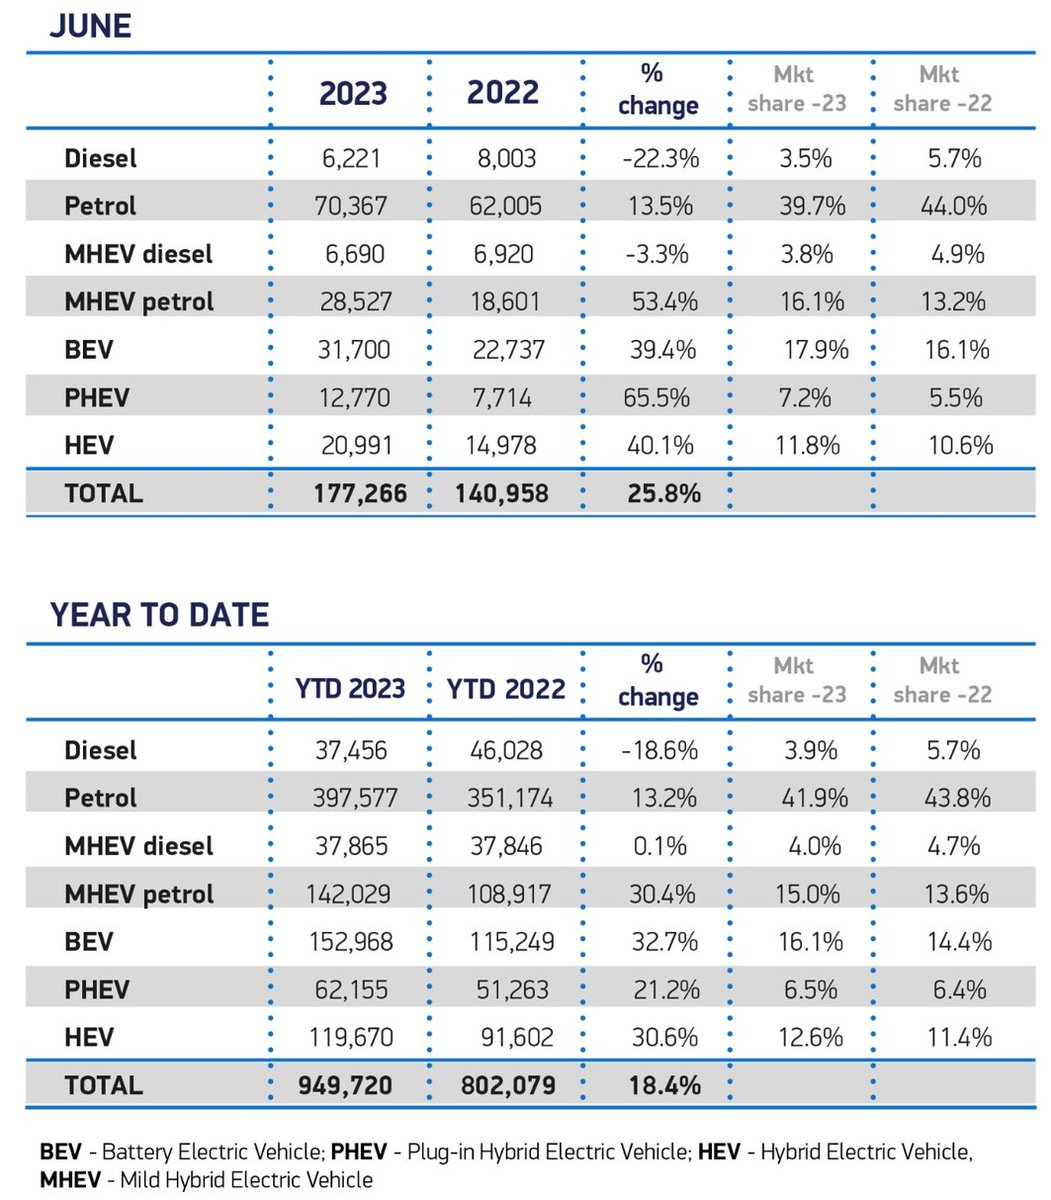 Good to see new car market recovering in @SMMT data, but #ULEV (23%) proportion (#EV 16.1% & #PHEV 6.5%) unchanged YTD from 2022 full year totals.  So more stimuli needed if we are to meet 22% #ZEVmandate next year. VAT reduction on public charging is an easy win! @Zemo_Org